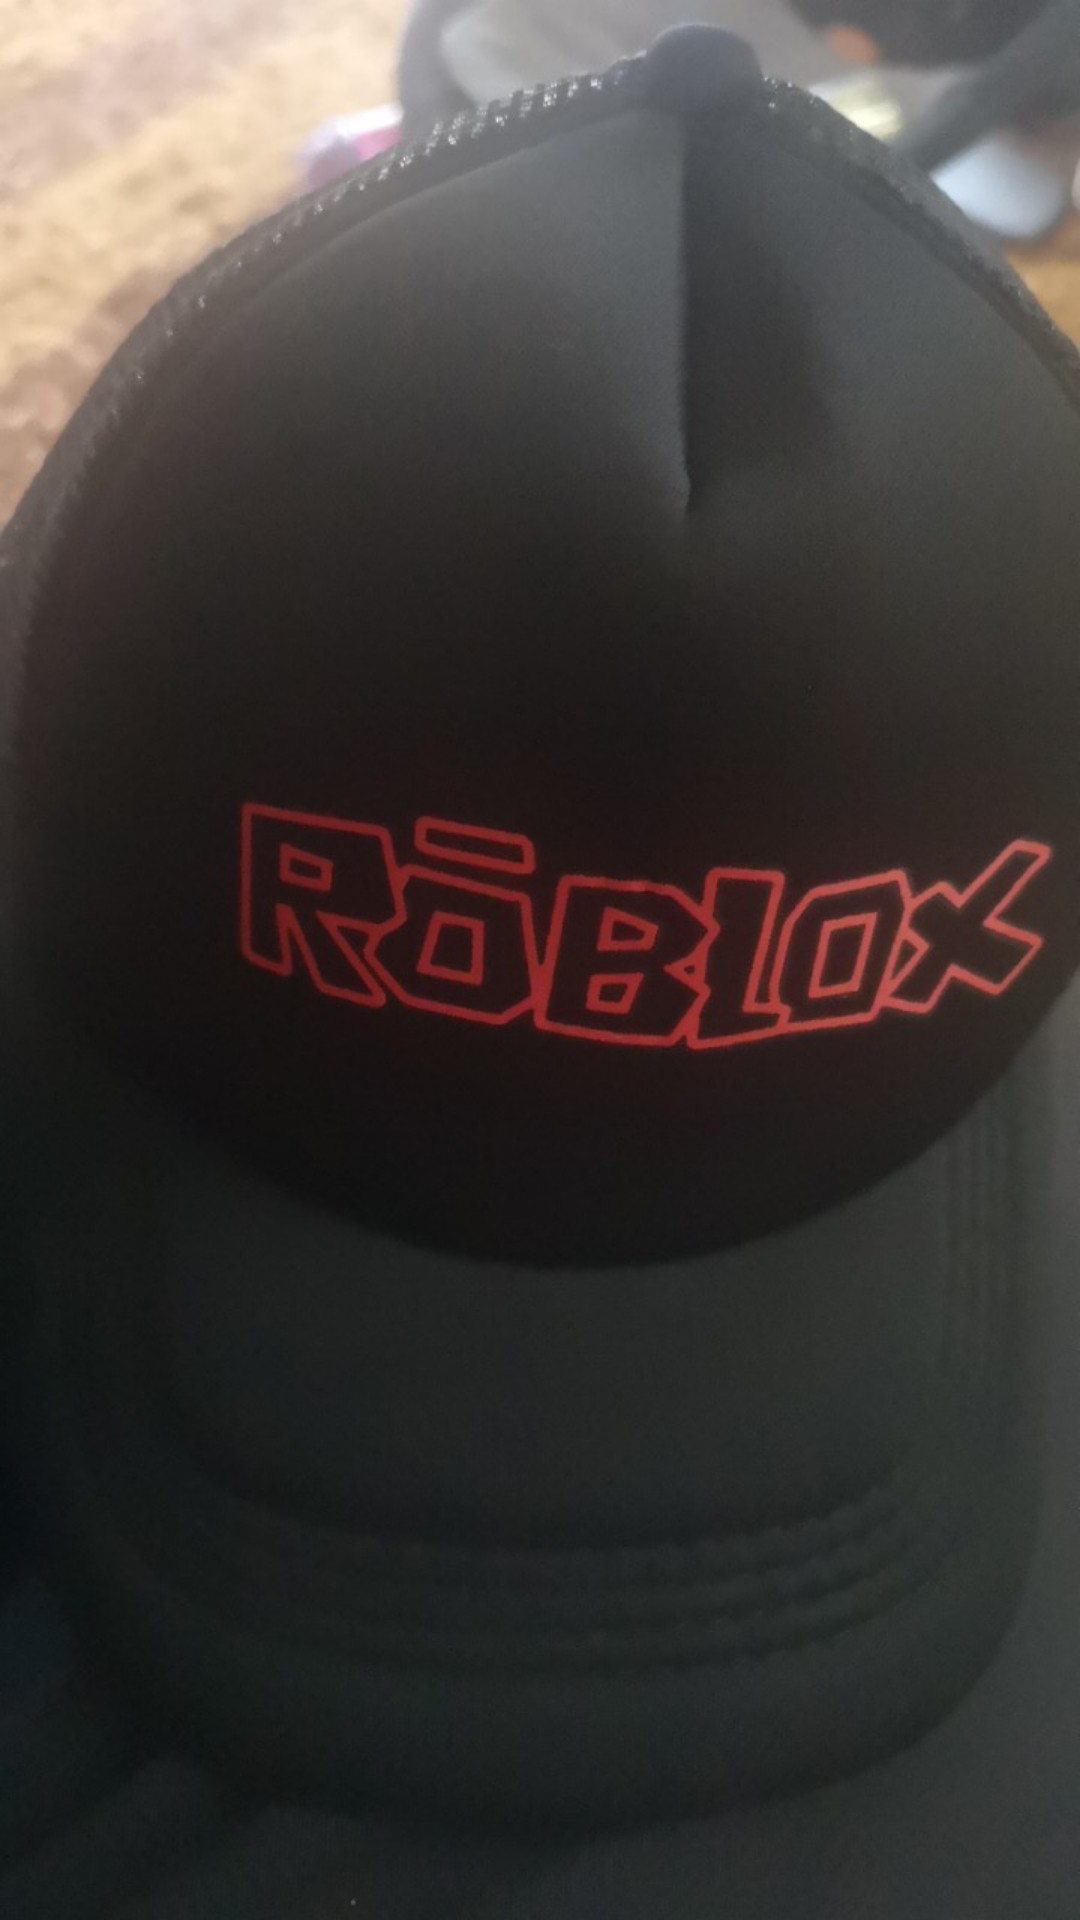 2020 New 6 Styles Roblox Kids Hats Adjustable Cartoon Summer Games Printed Baseball Caps Fashion Boy Kids Hats By Best4u Shopee Malaysia - kids summer caps hot game roblox printed stylish cap boys casual hats girls hats childrens action toy hats birthday party gift